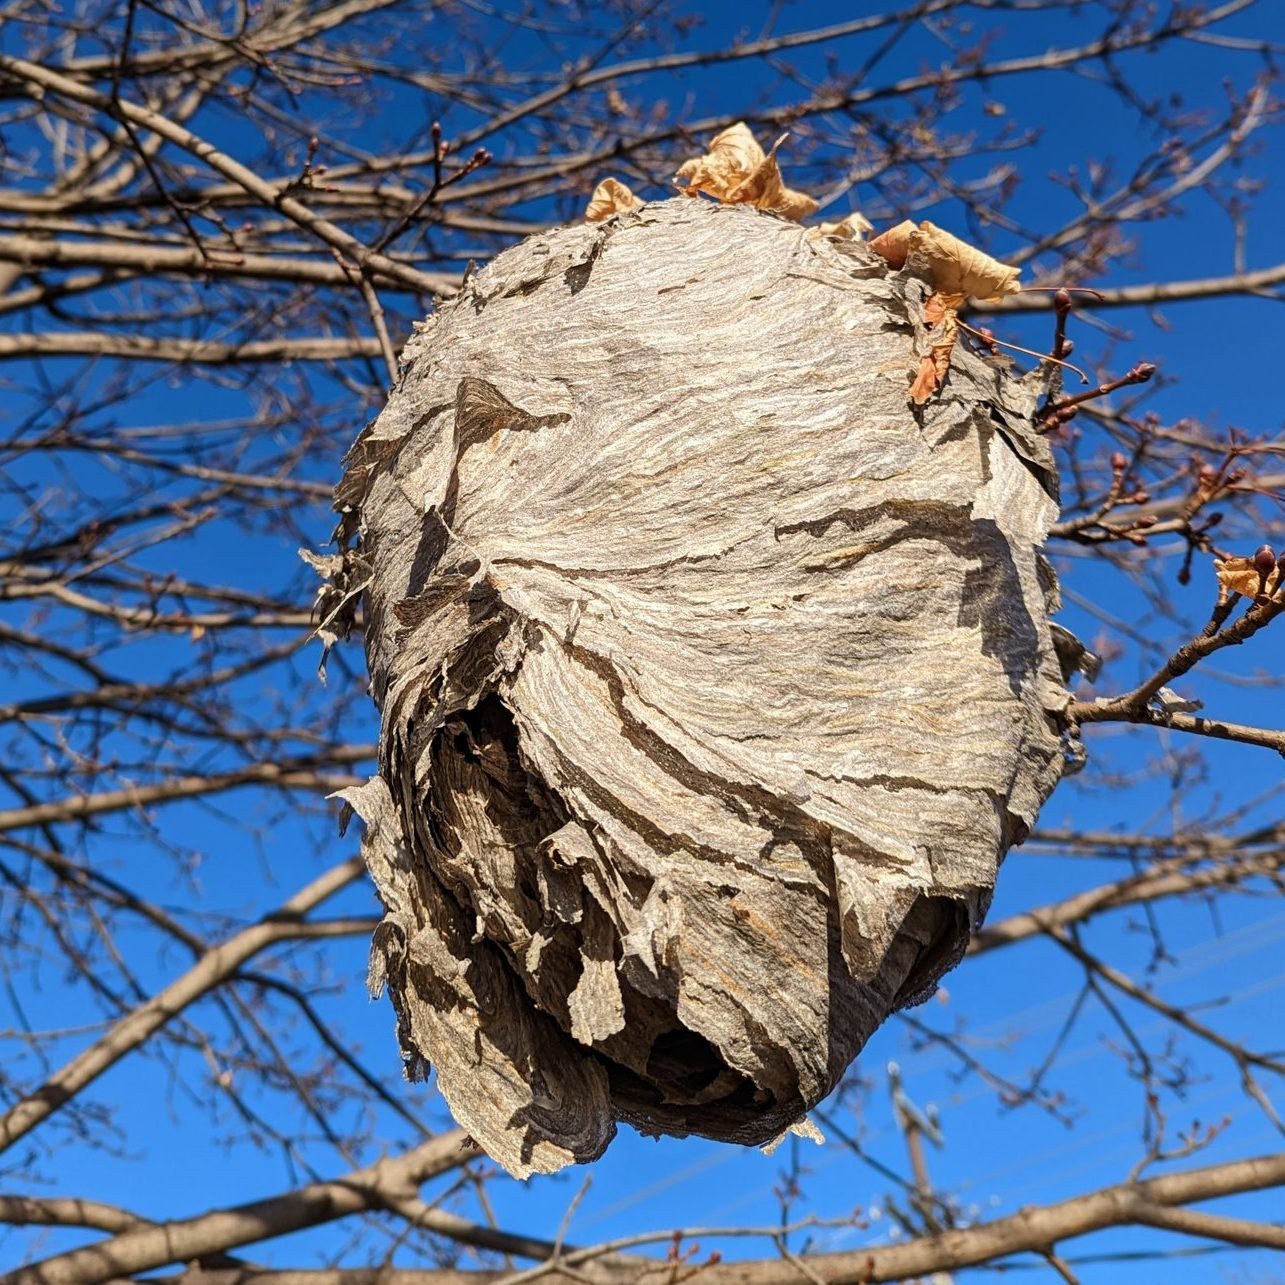 Where Do Wasps Go in the Winter?